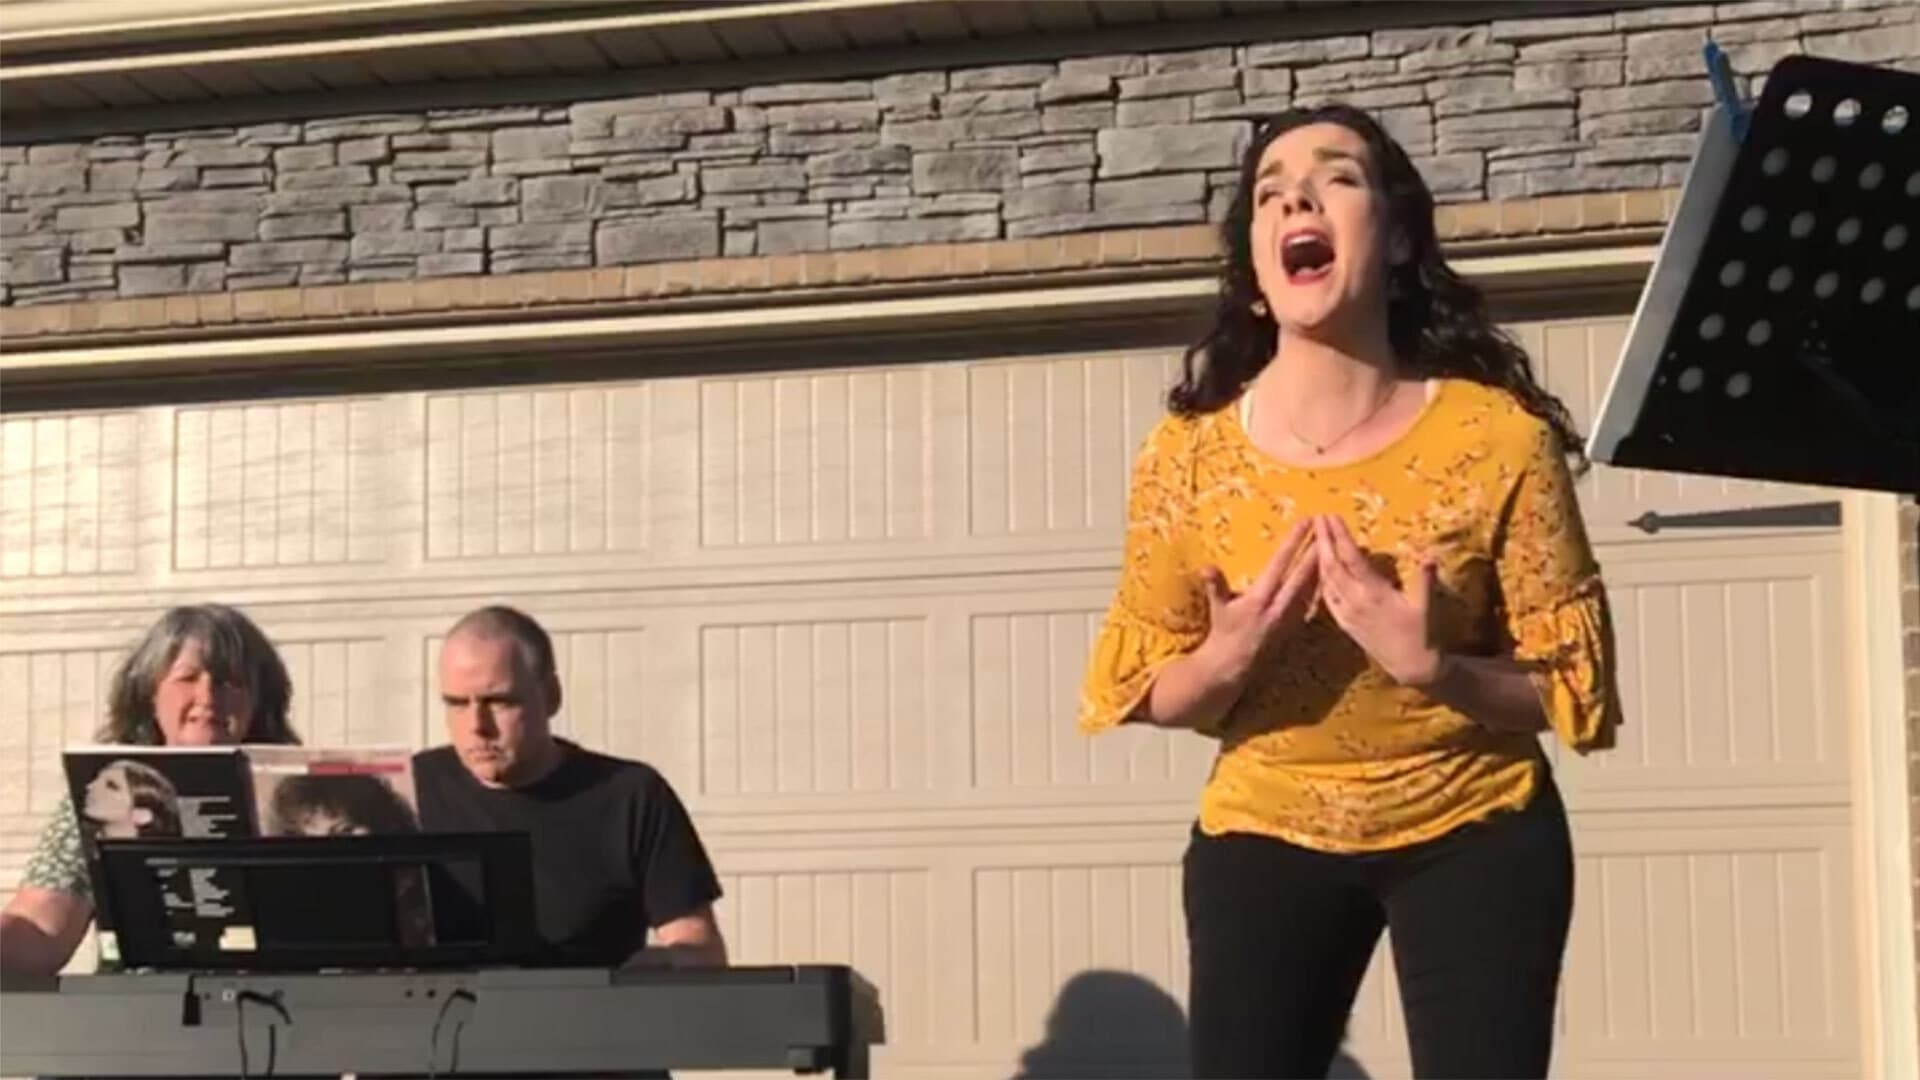 Esther Atkinson sings on driveway